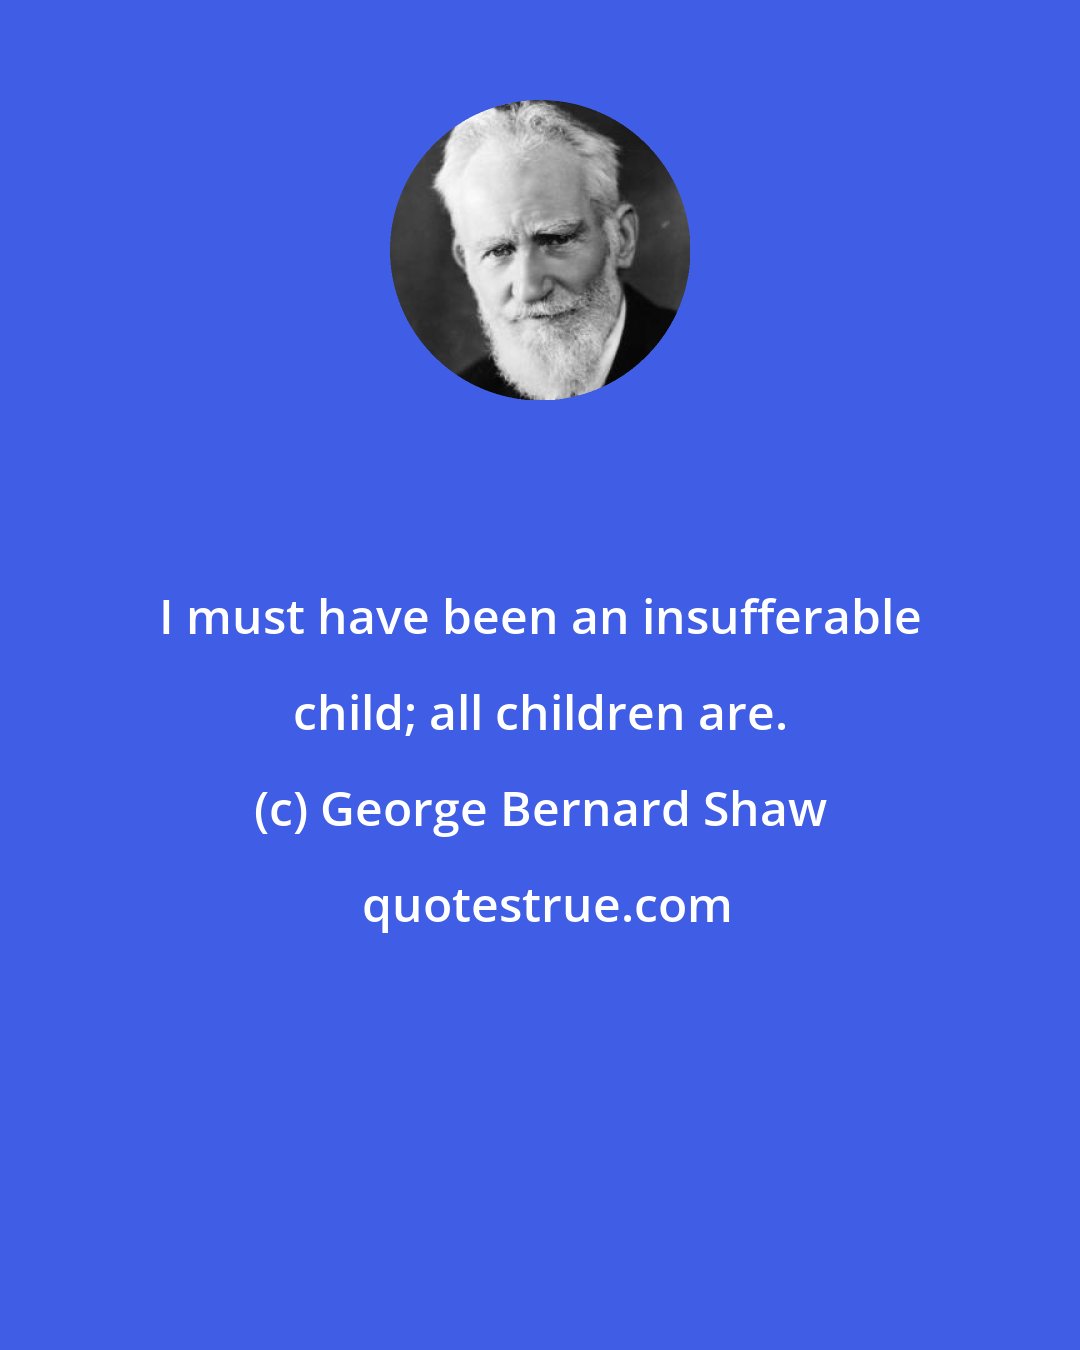 George Bernard Shaw: I must have been an insufferable child; all children are.